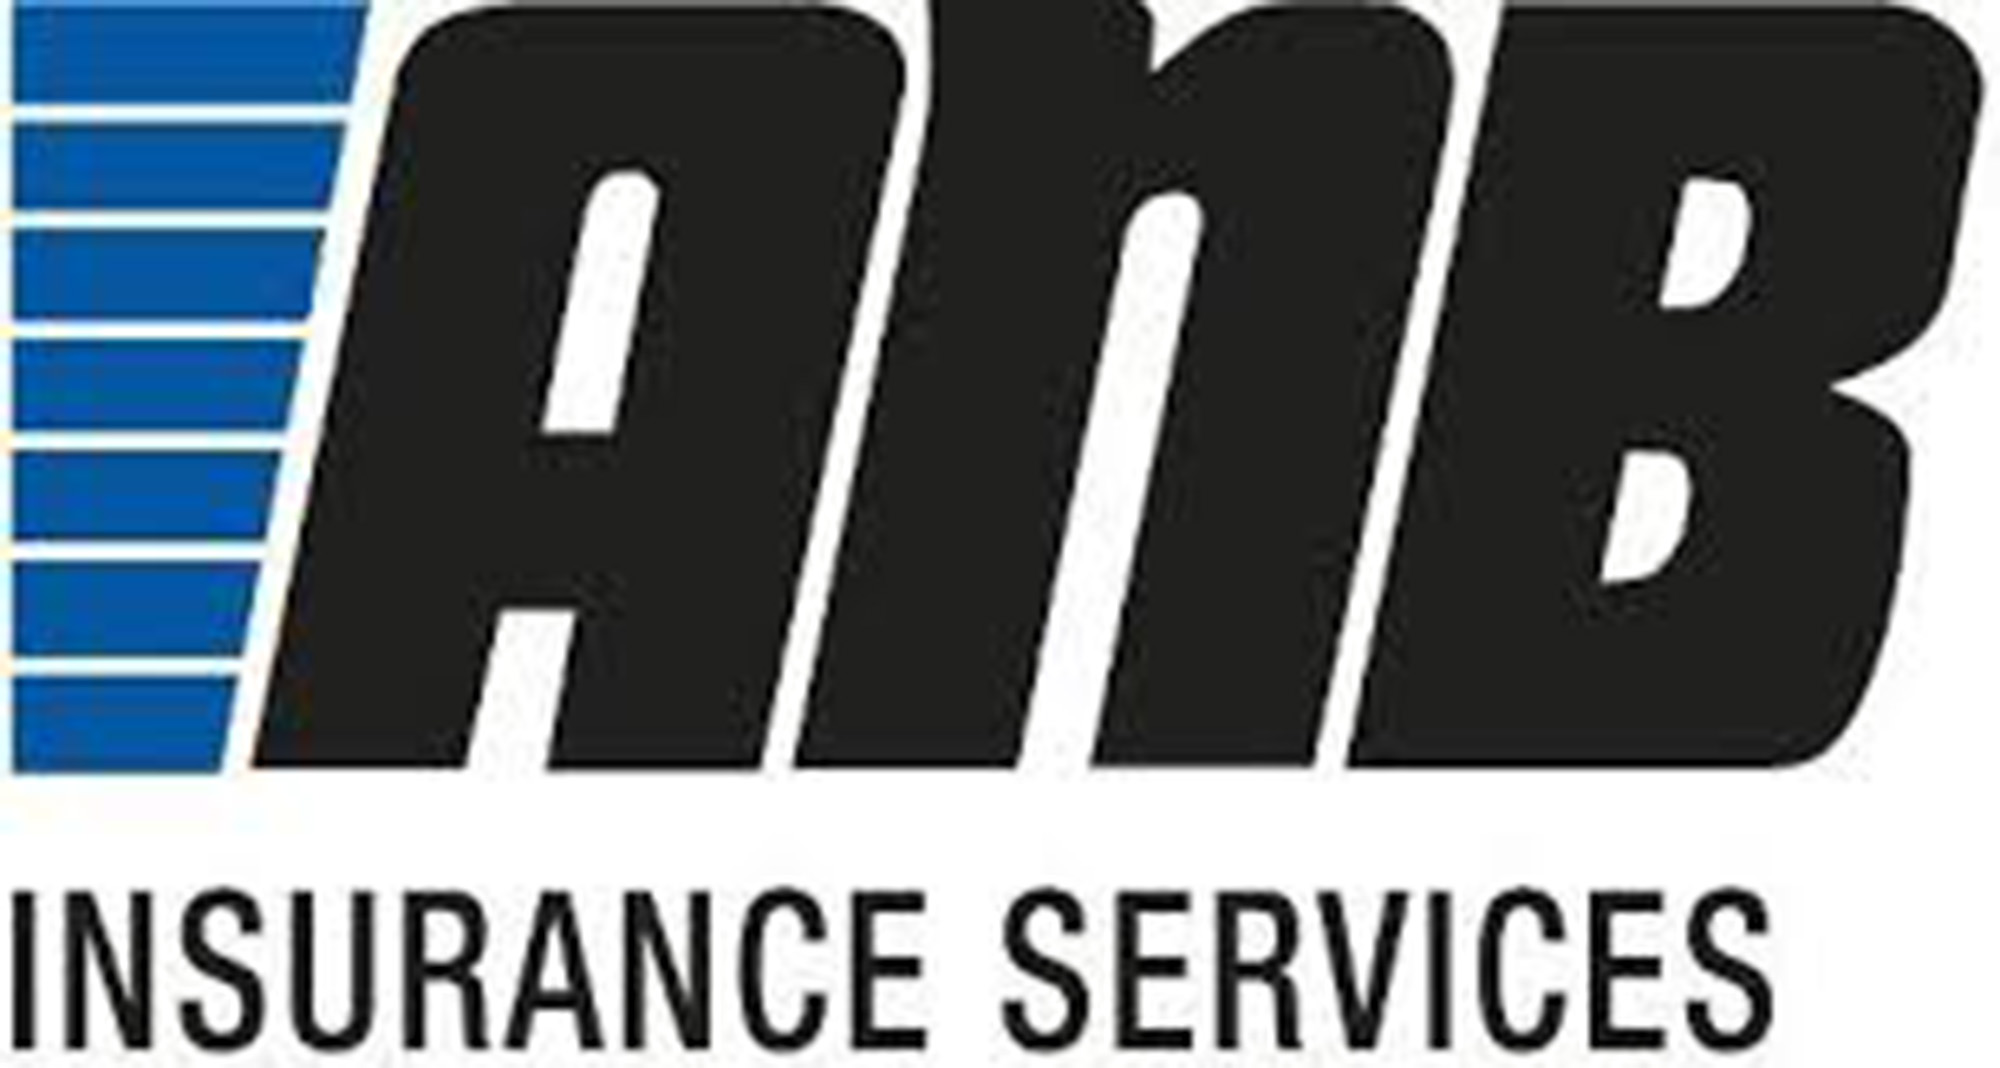 ANB Insurance Services